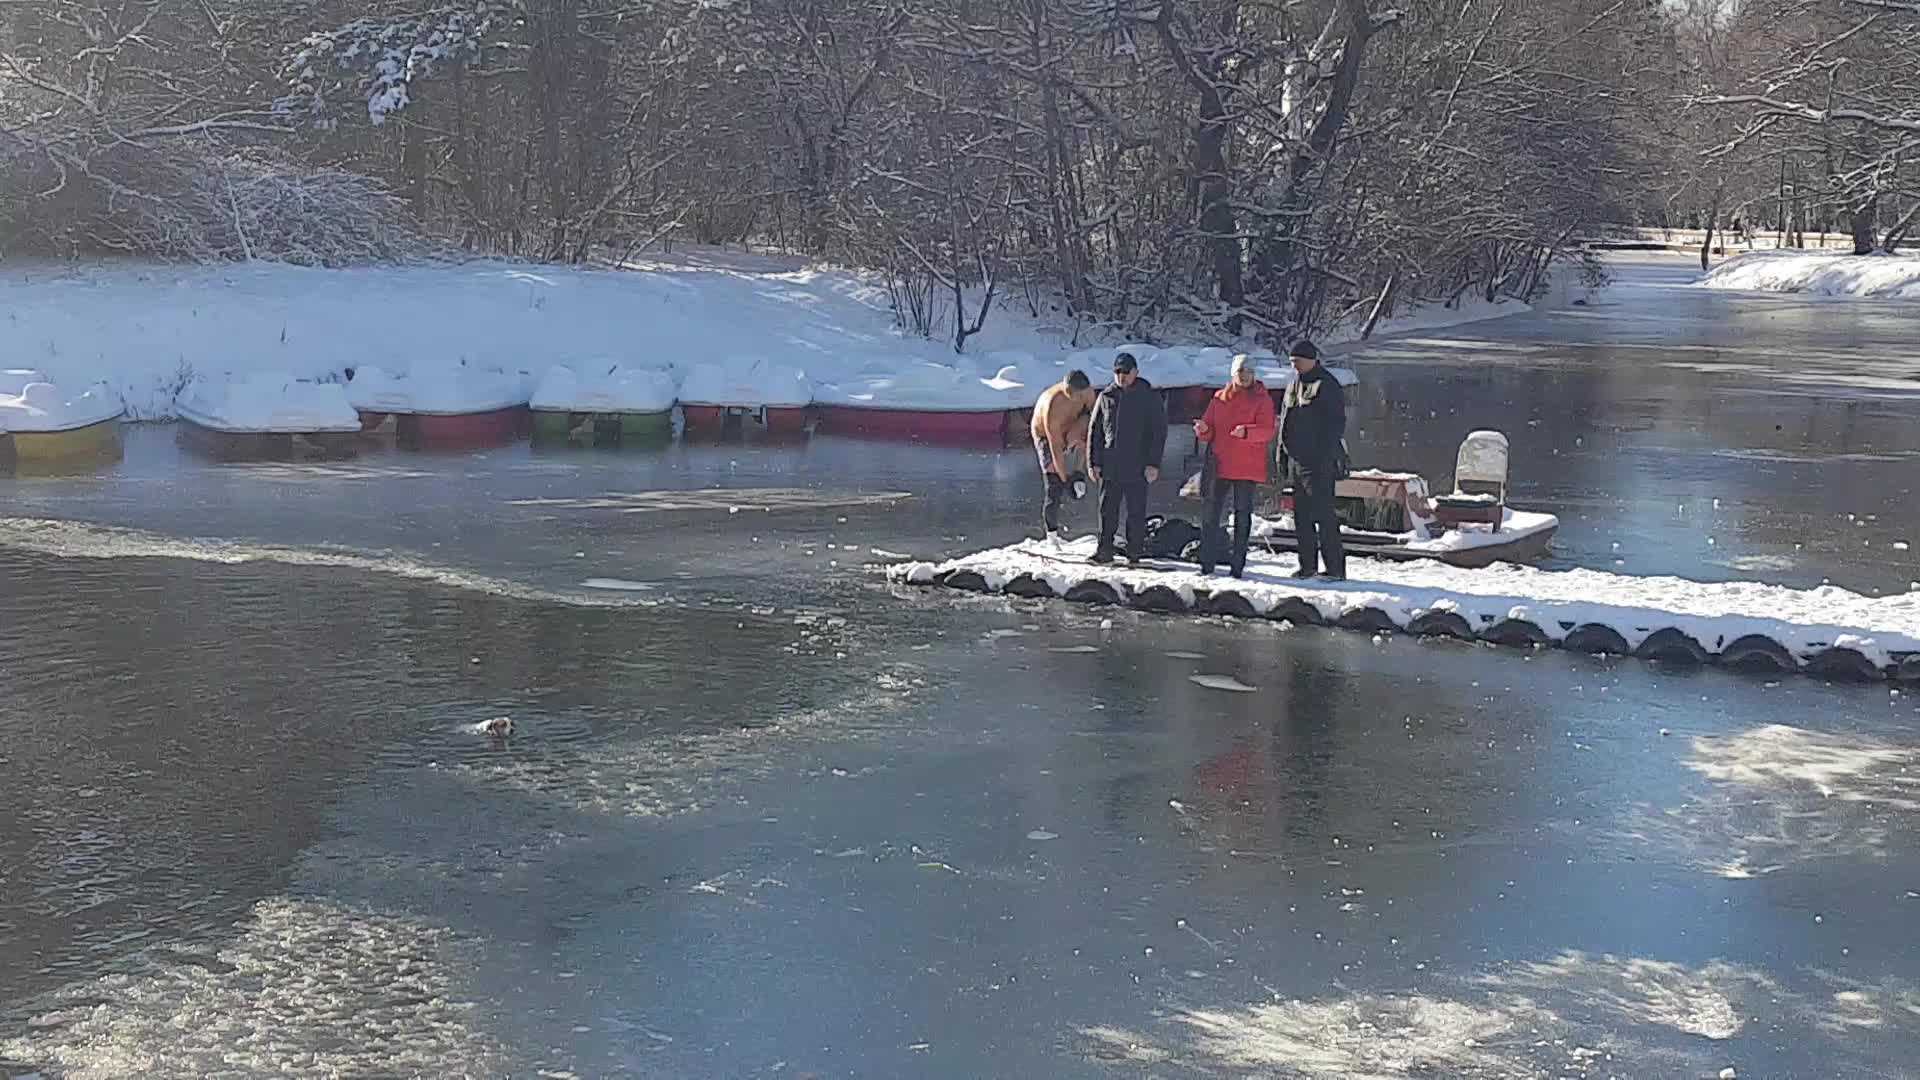 Brave Man Rescues Dog from Frozen Pond! Great Save!